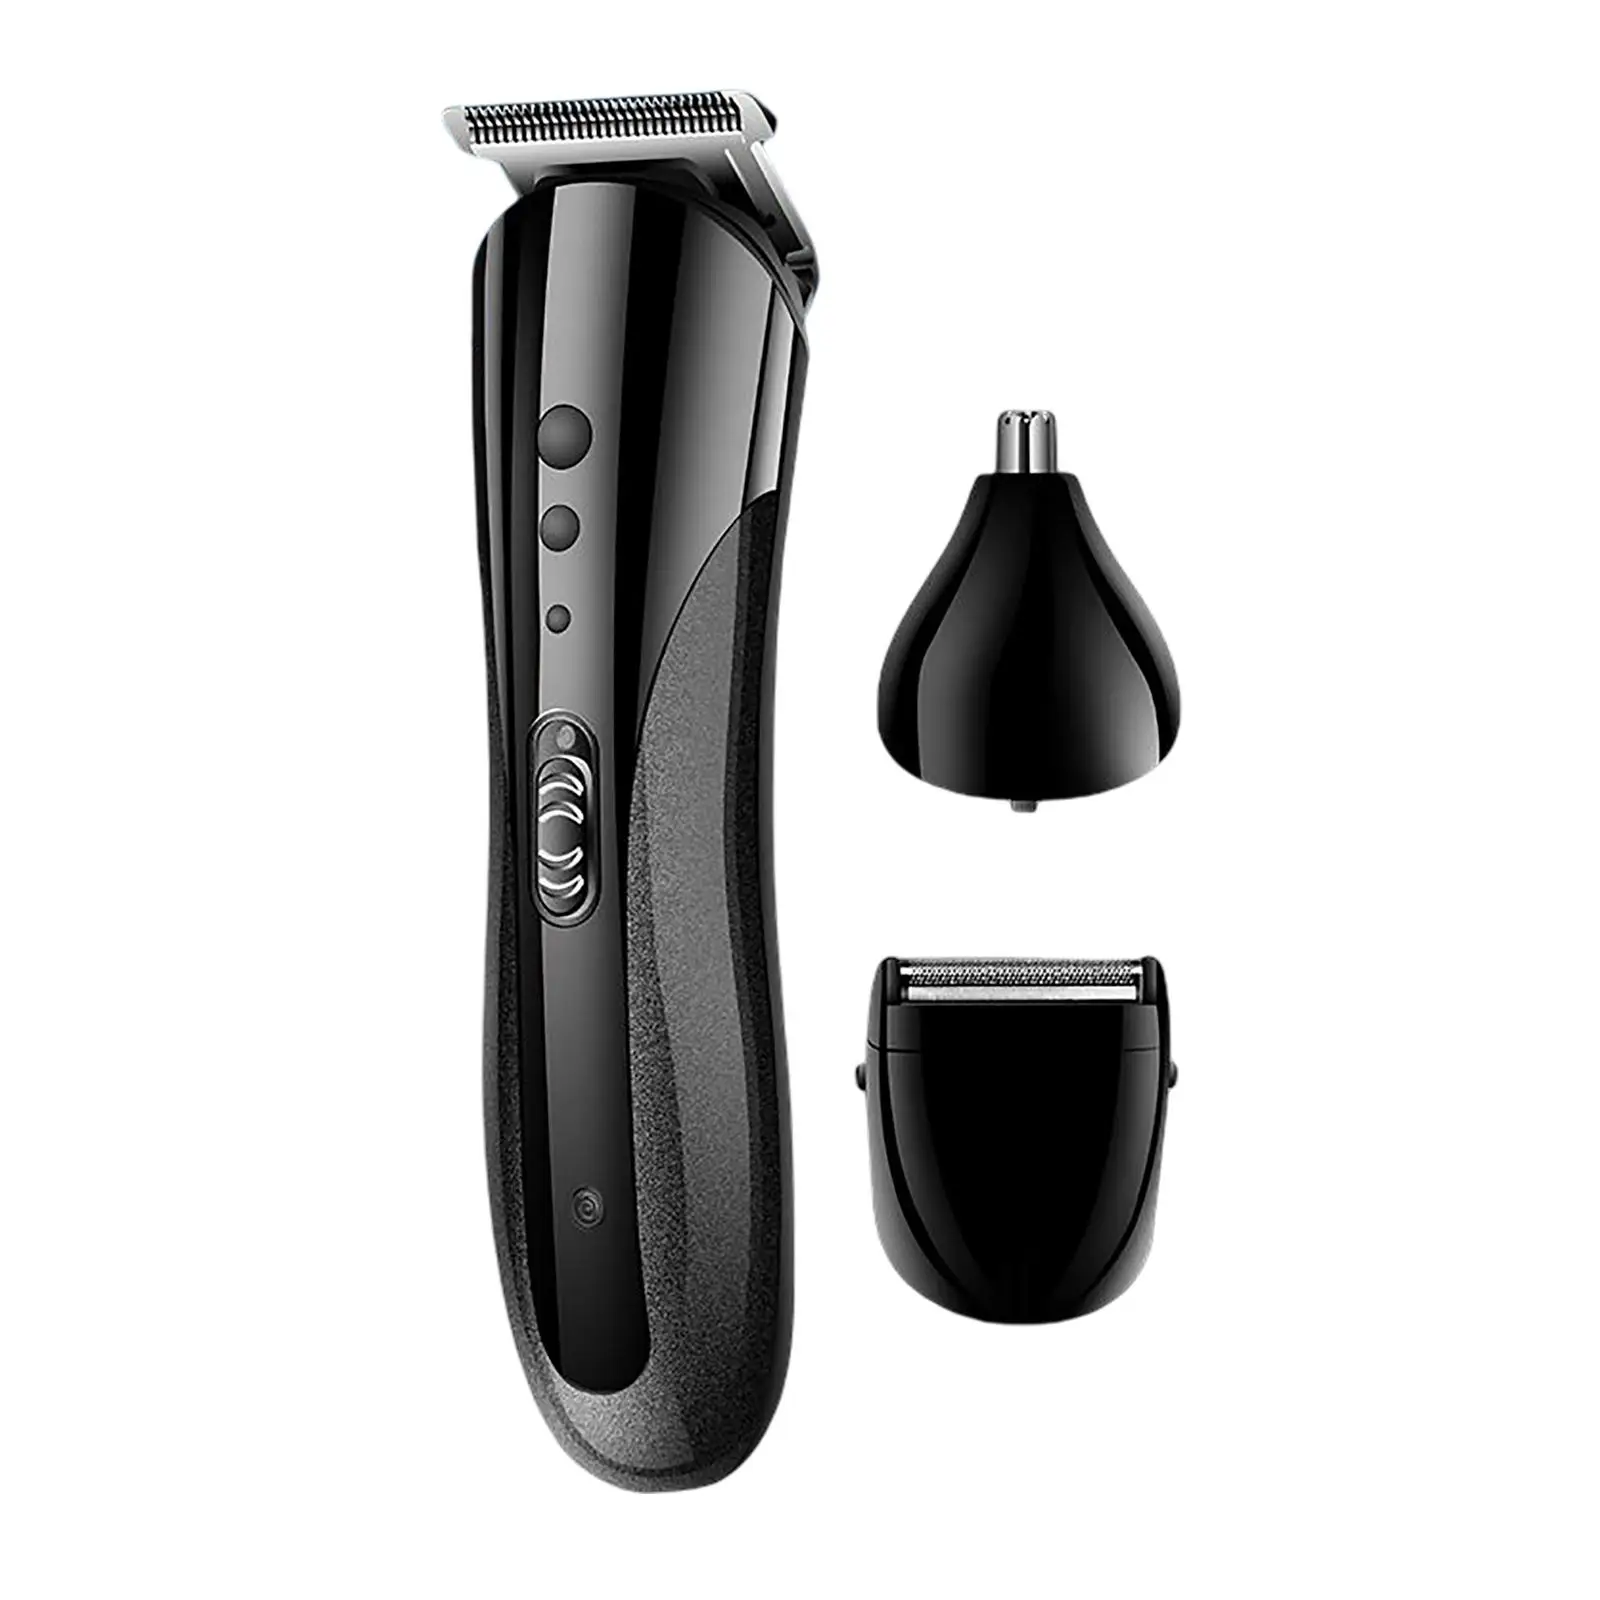 Wireless Hair Clippers Trimmer USB Charging Detachable Blade Carbon Steel Blades 4 Limited Comb Facial Hair Shaver Men Gifts EU